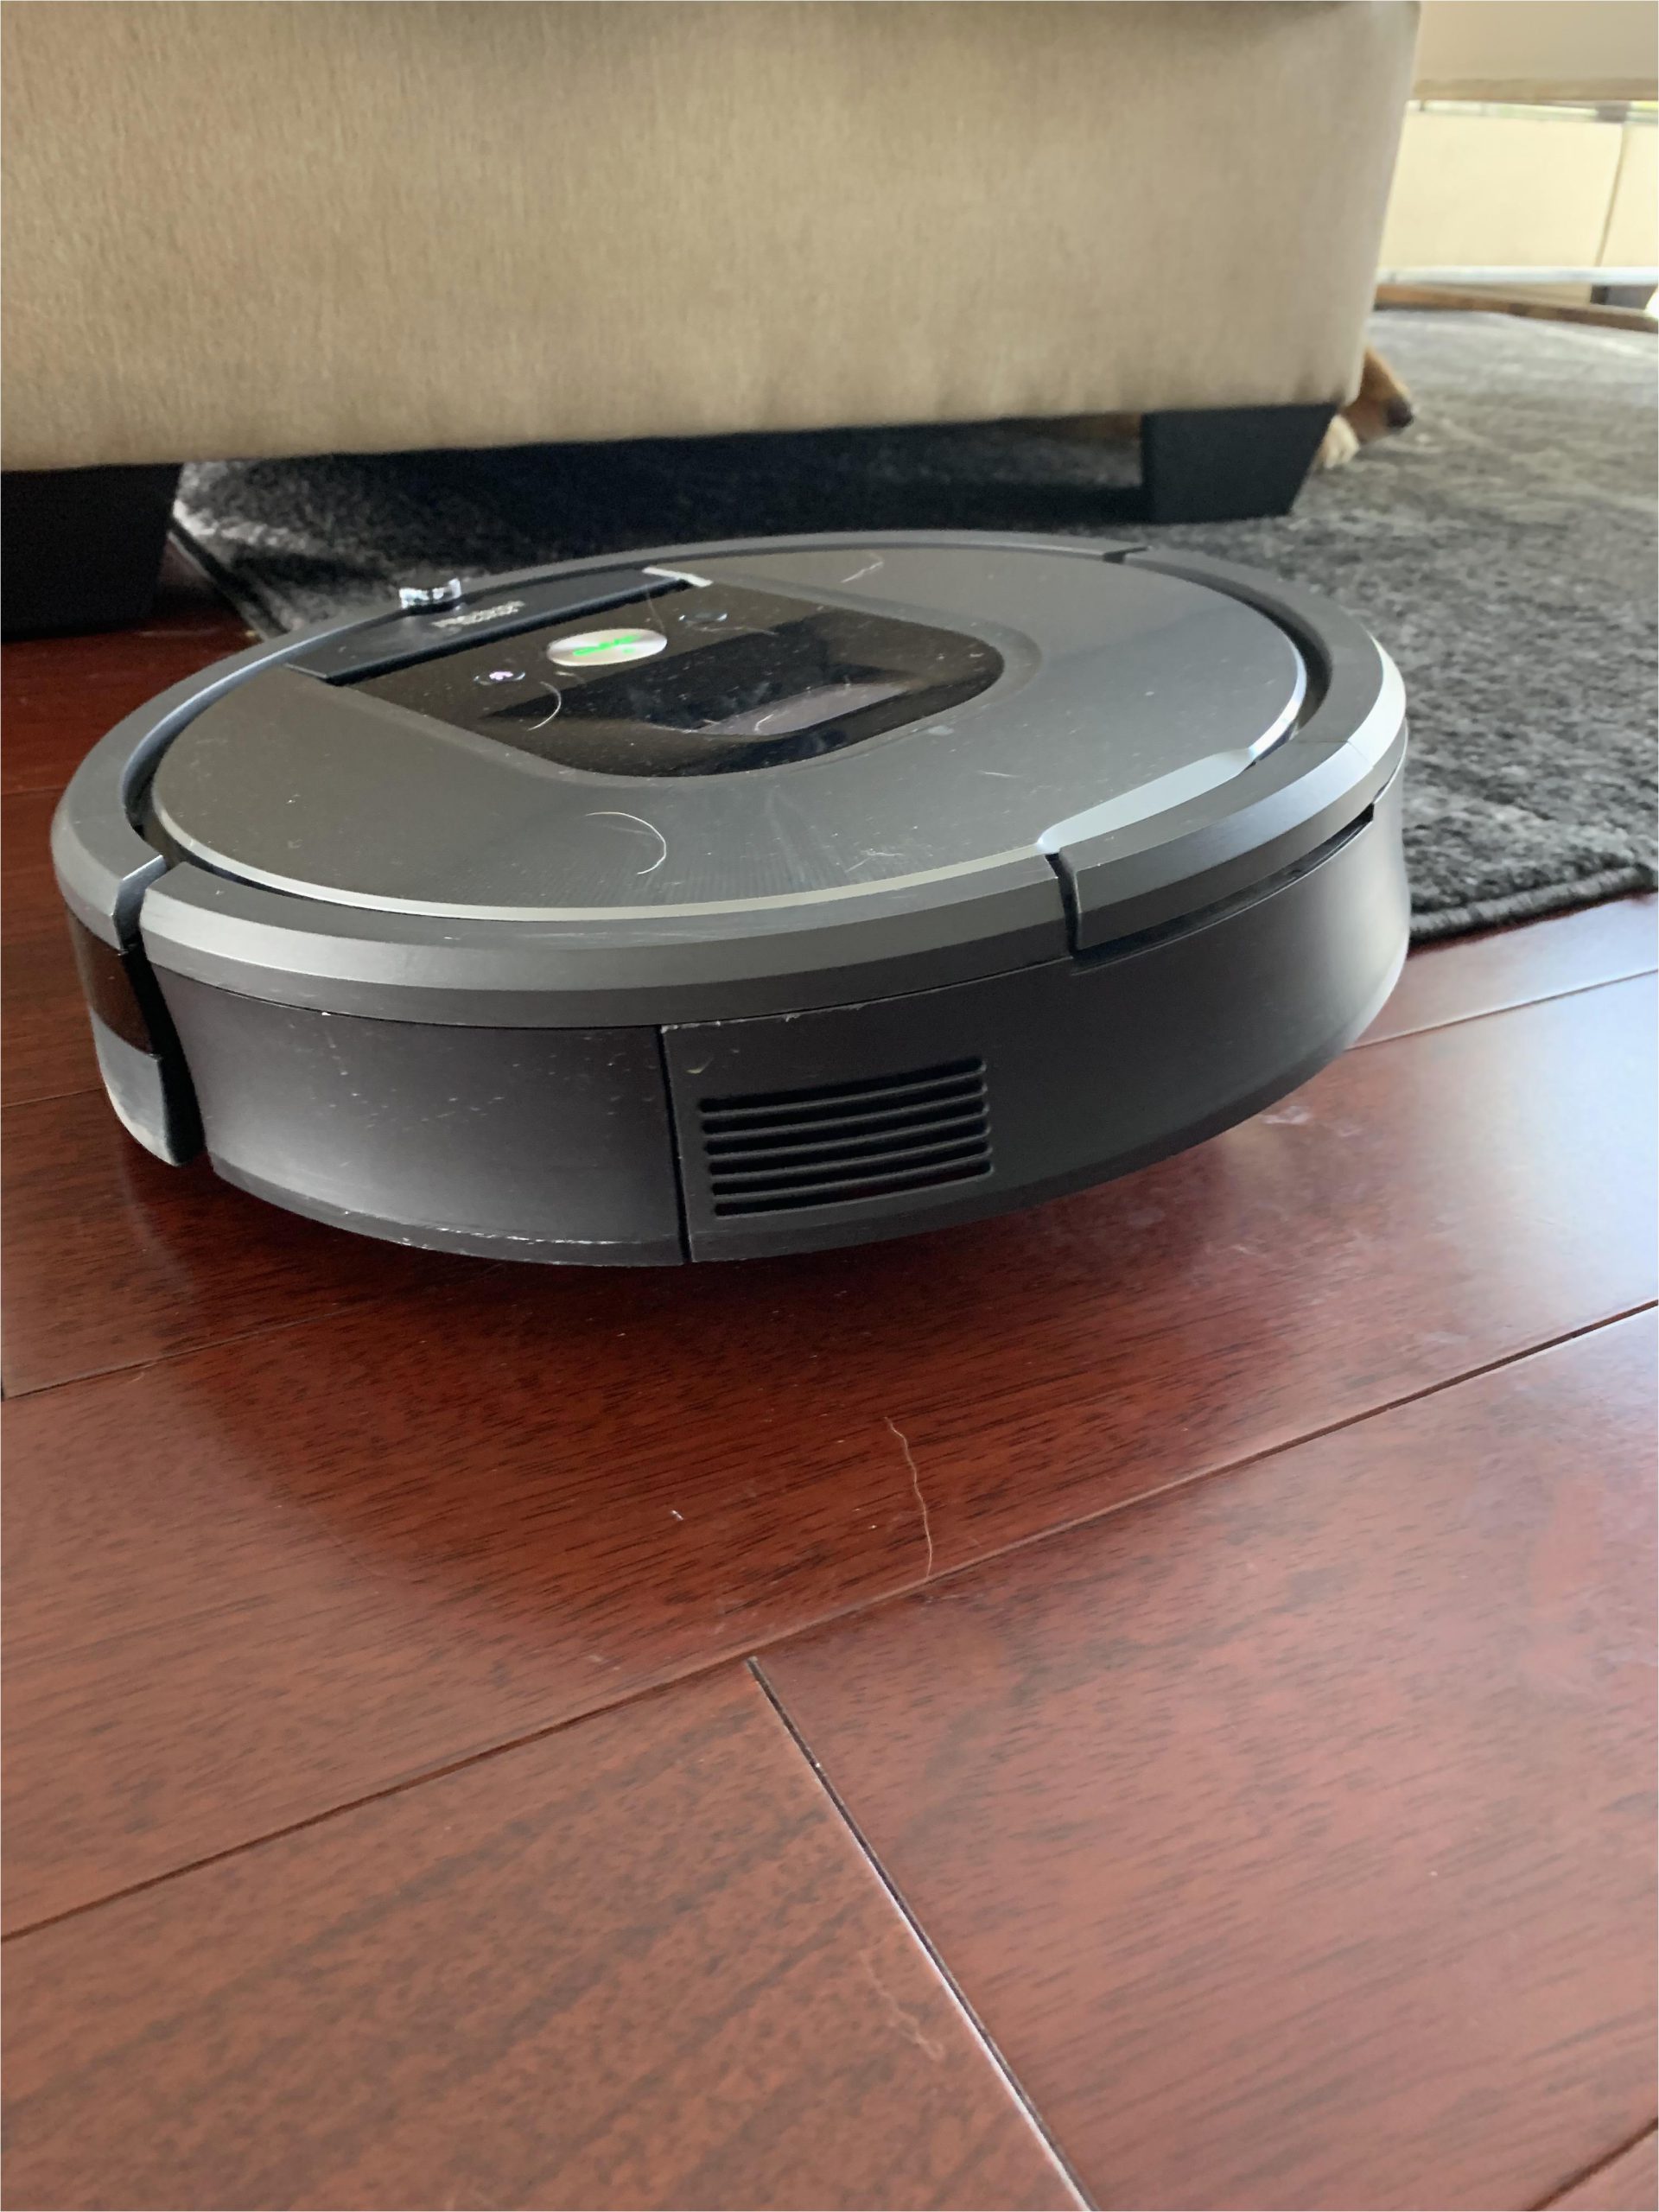 Does Roomba Work On area Rugs Roomba Ting Stuck On Rug Corners Any Tips Roomba